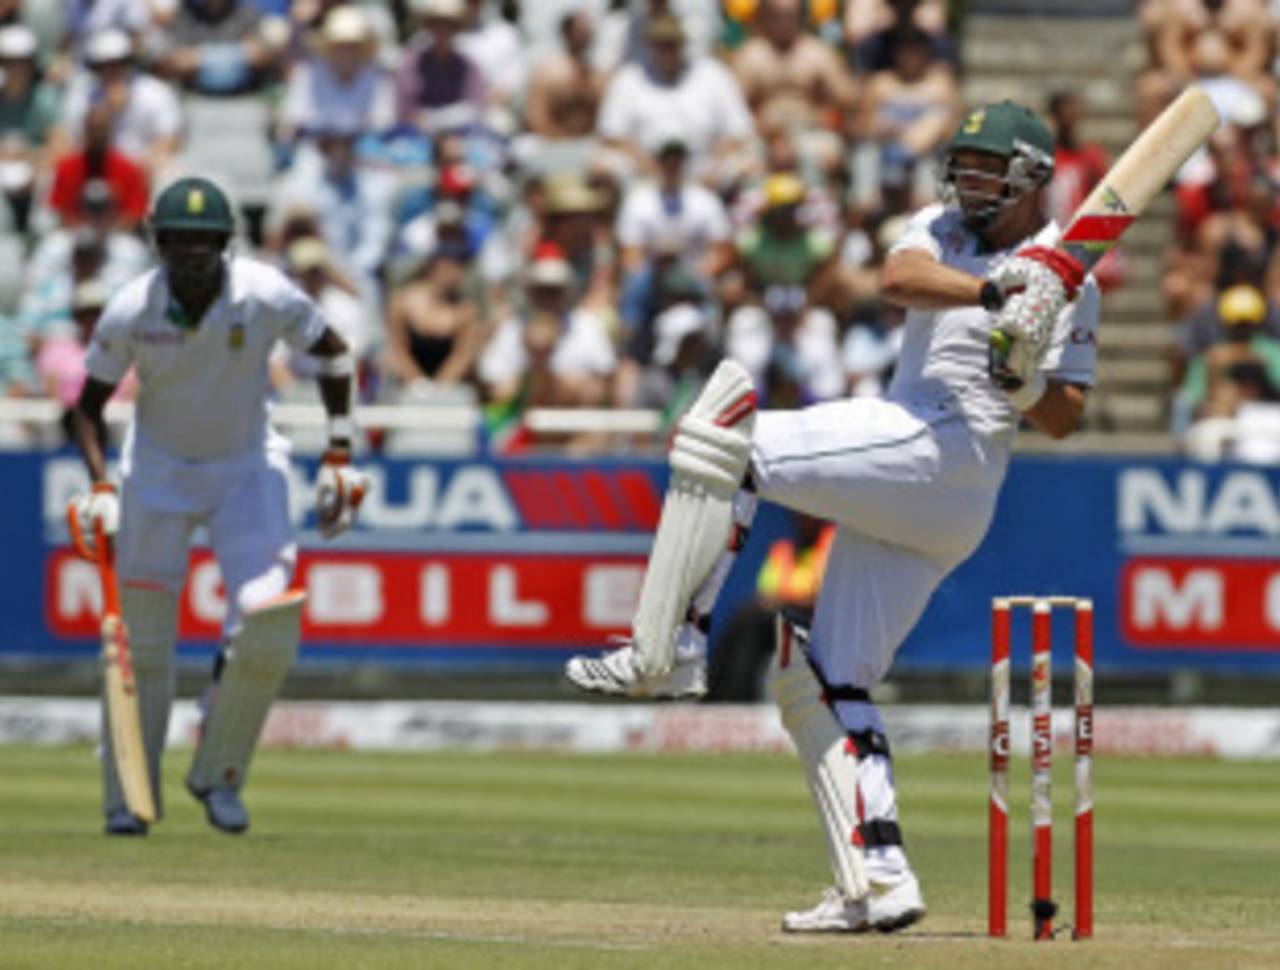 Despite being in pain, Jacques Kallis batted smartly with the tail to swell South Africa's score&nbsp;&nbsp;&bull;&nbsp;&nbsp;Associated Press